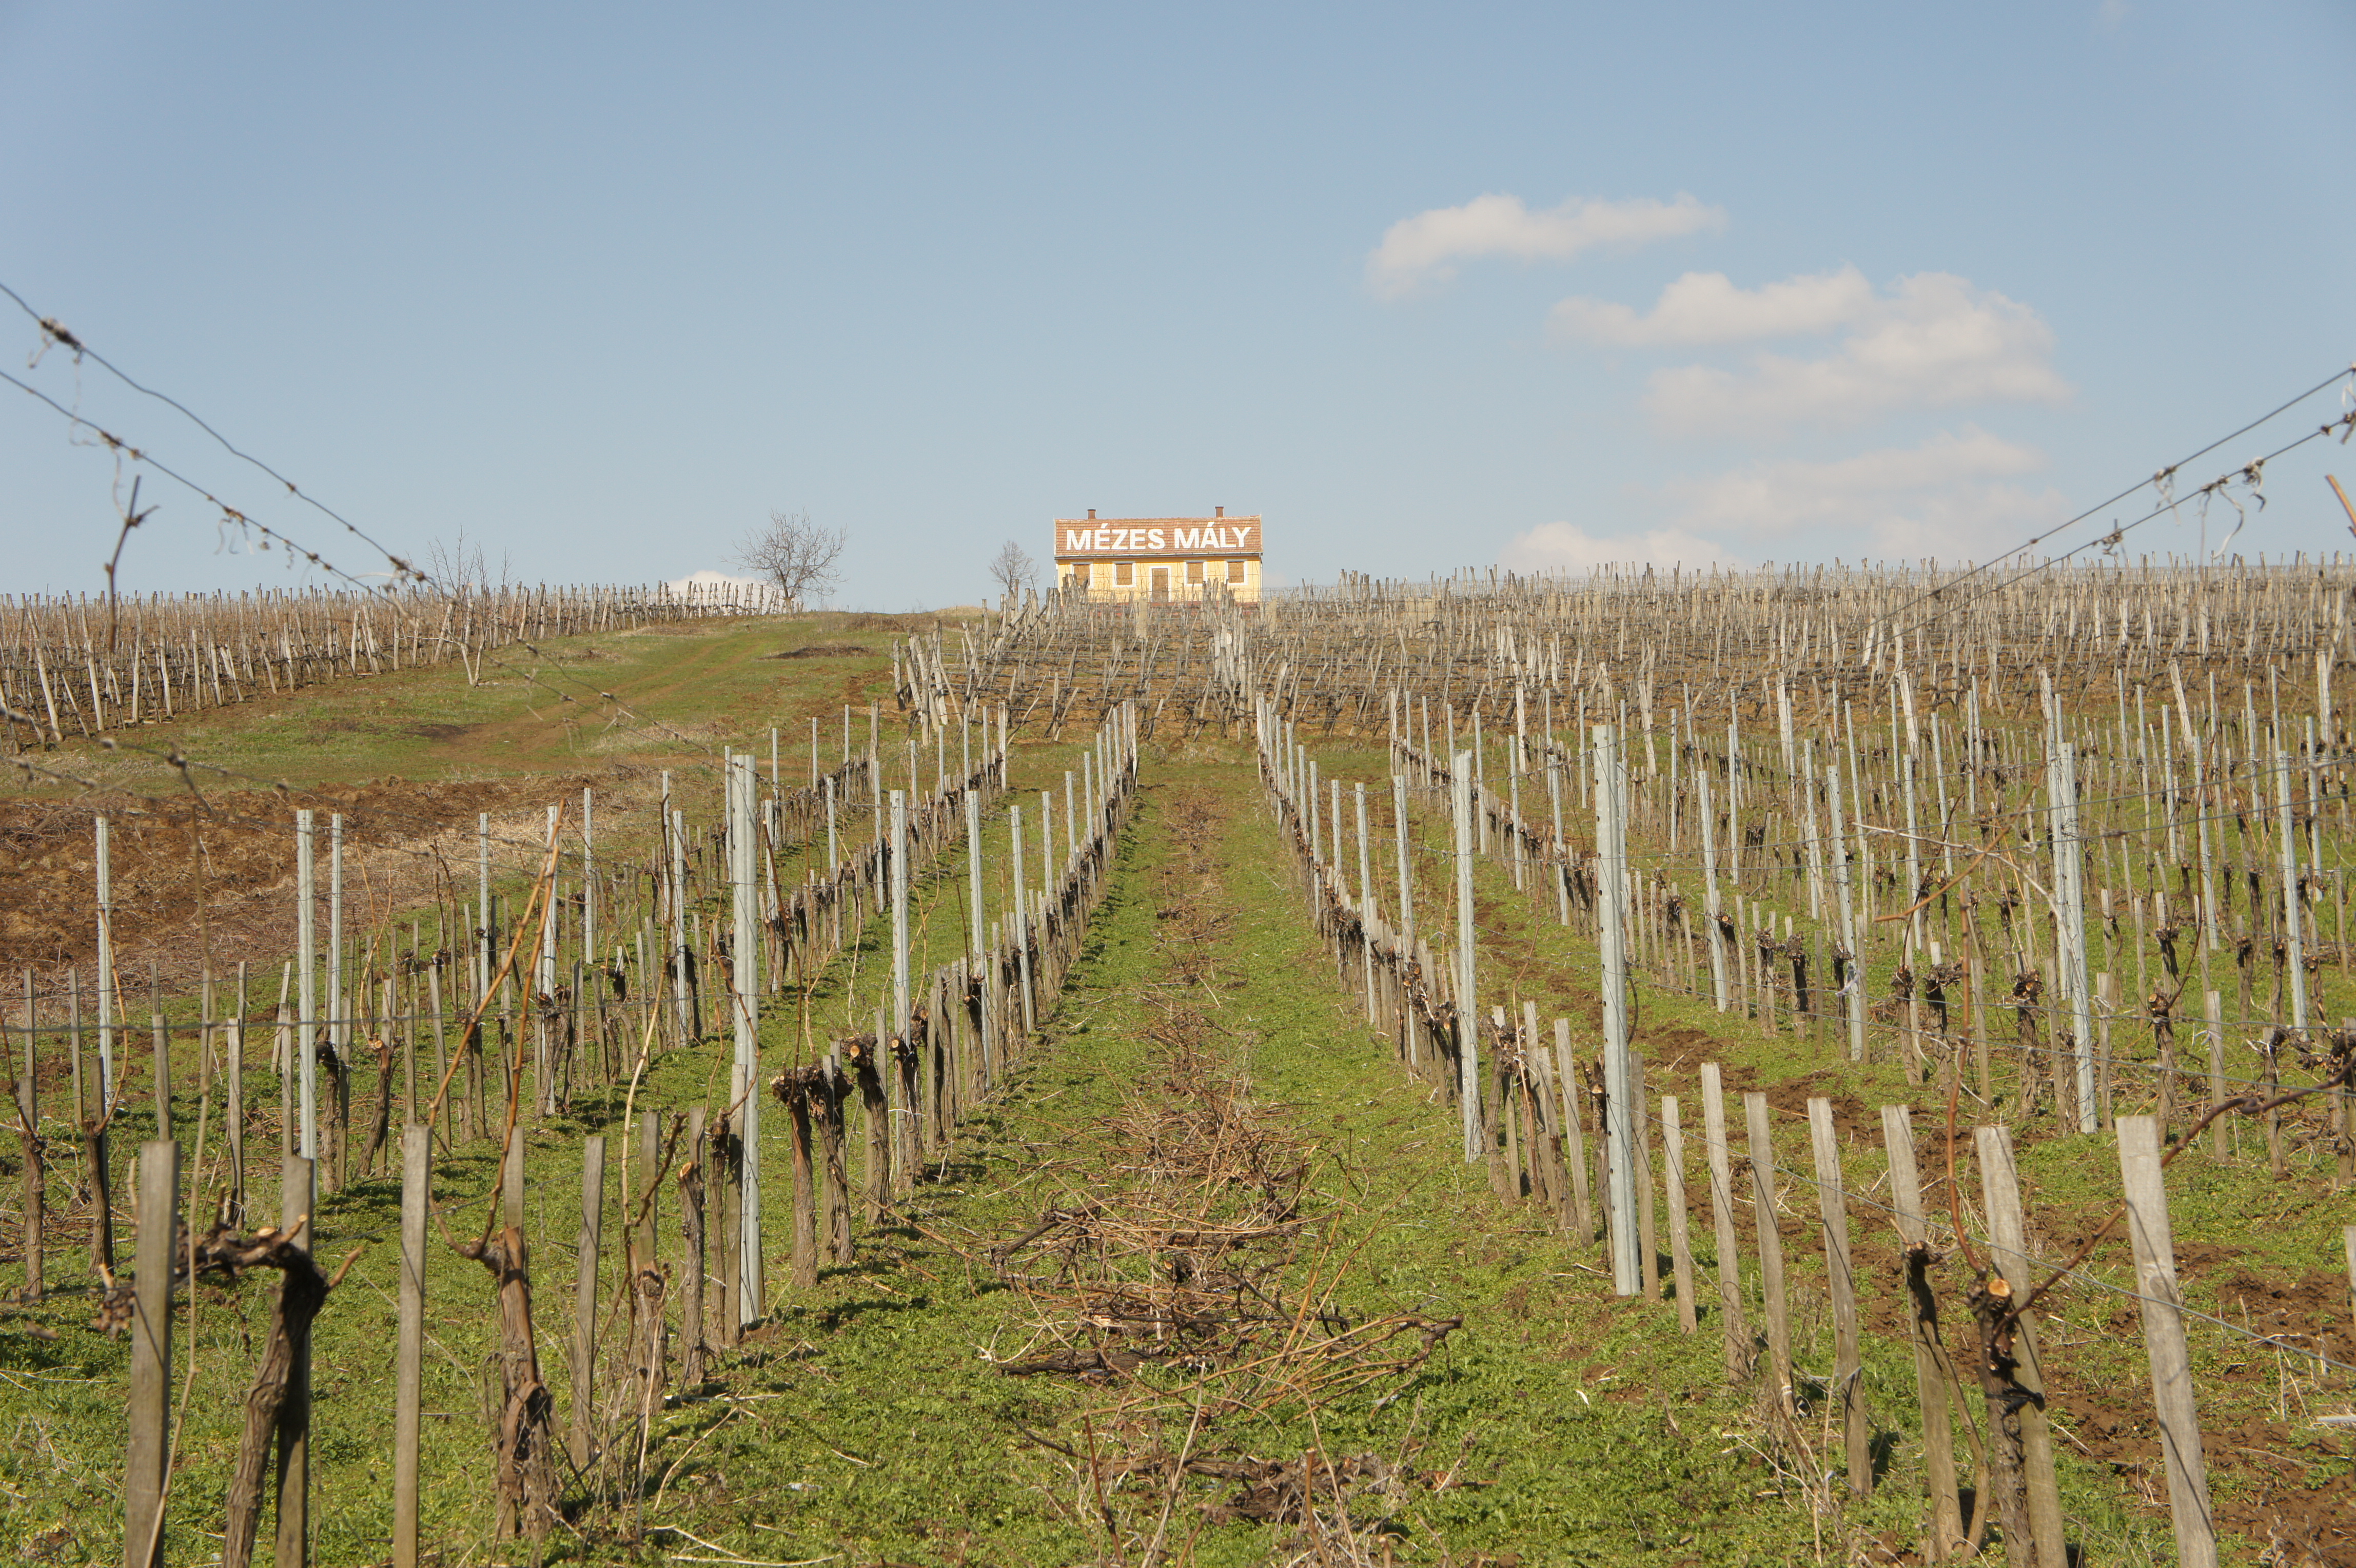 Grapevines in tidy rows